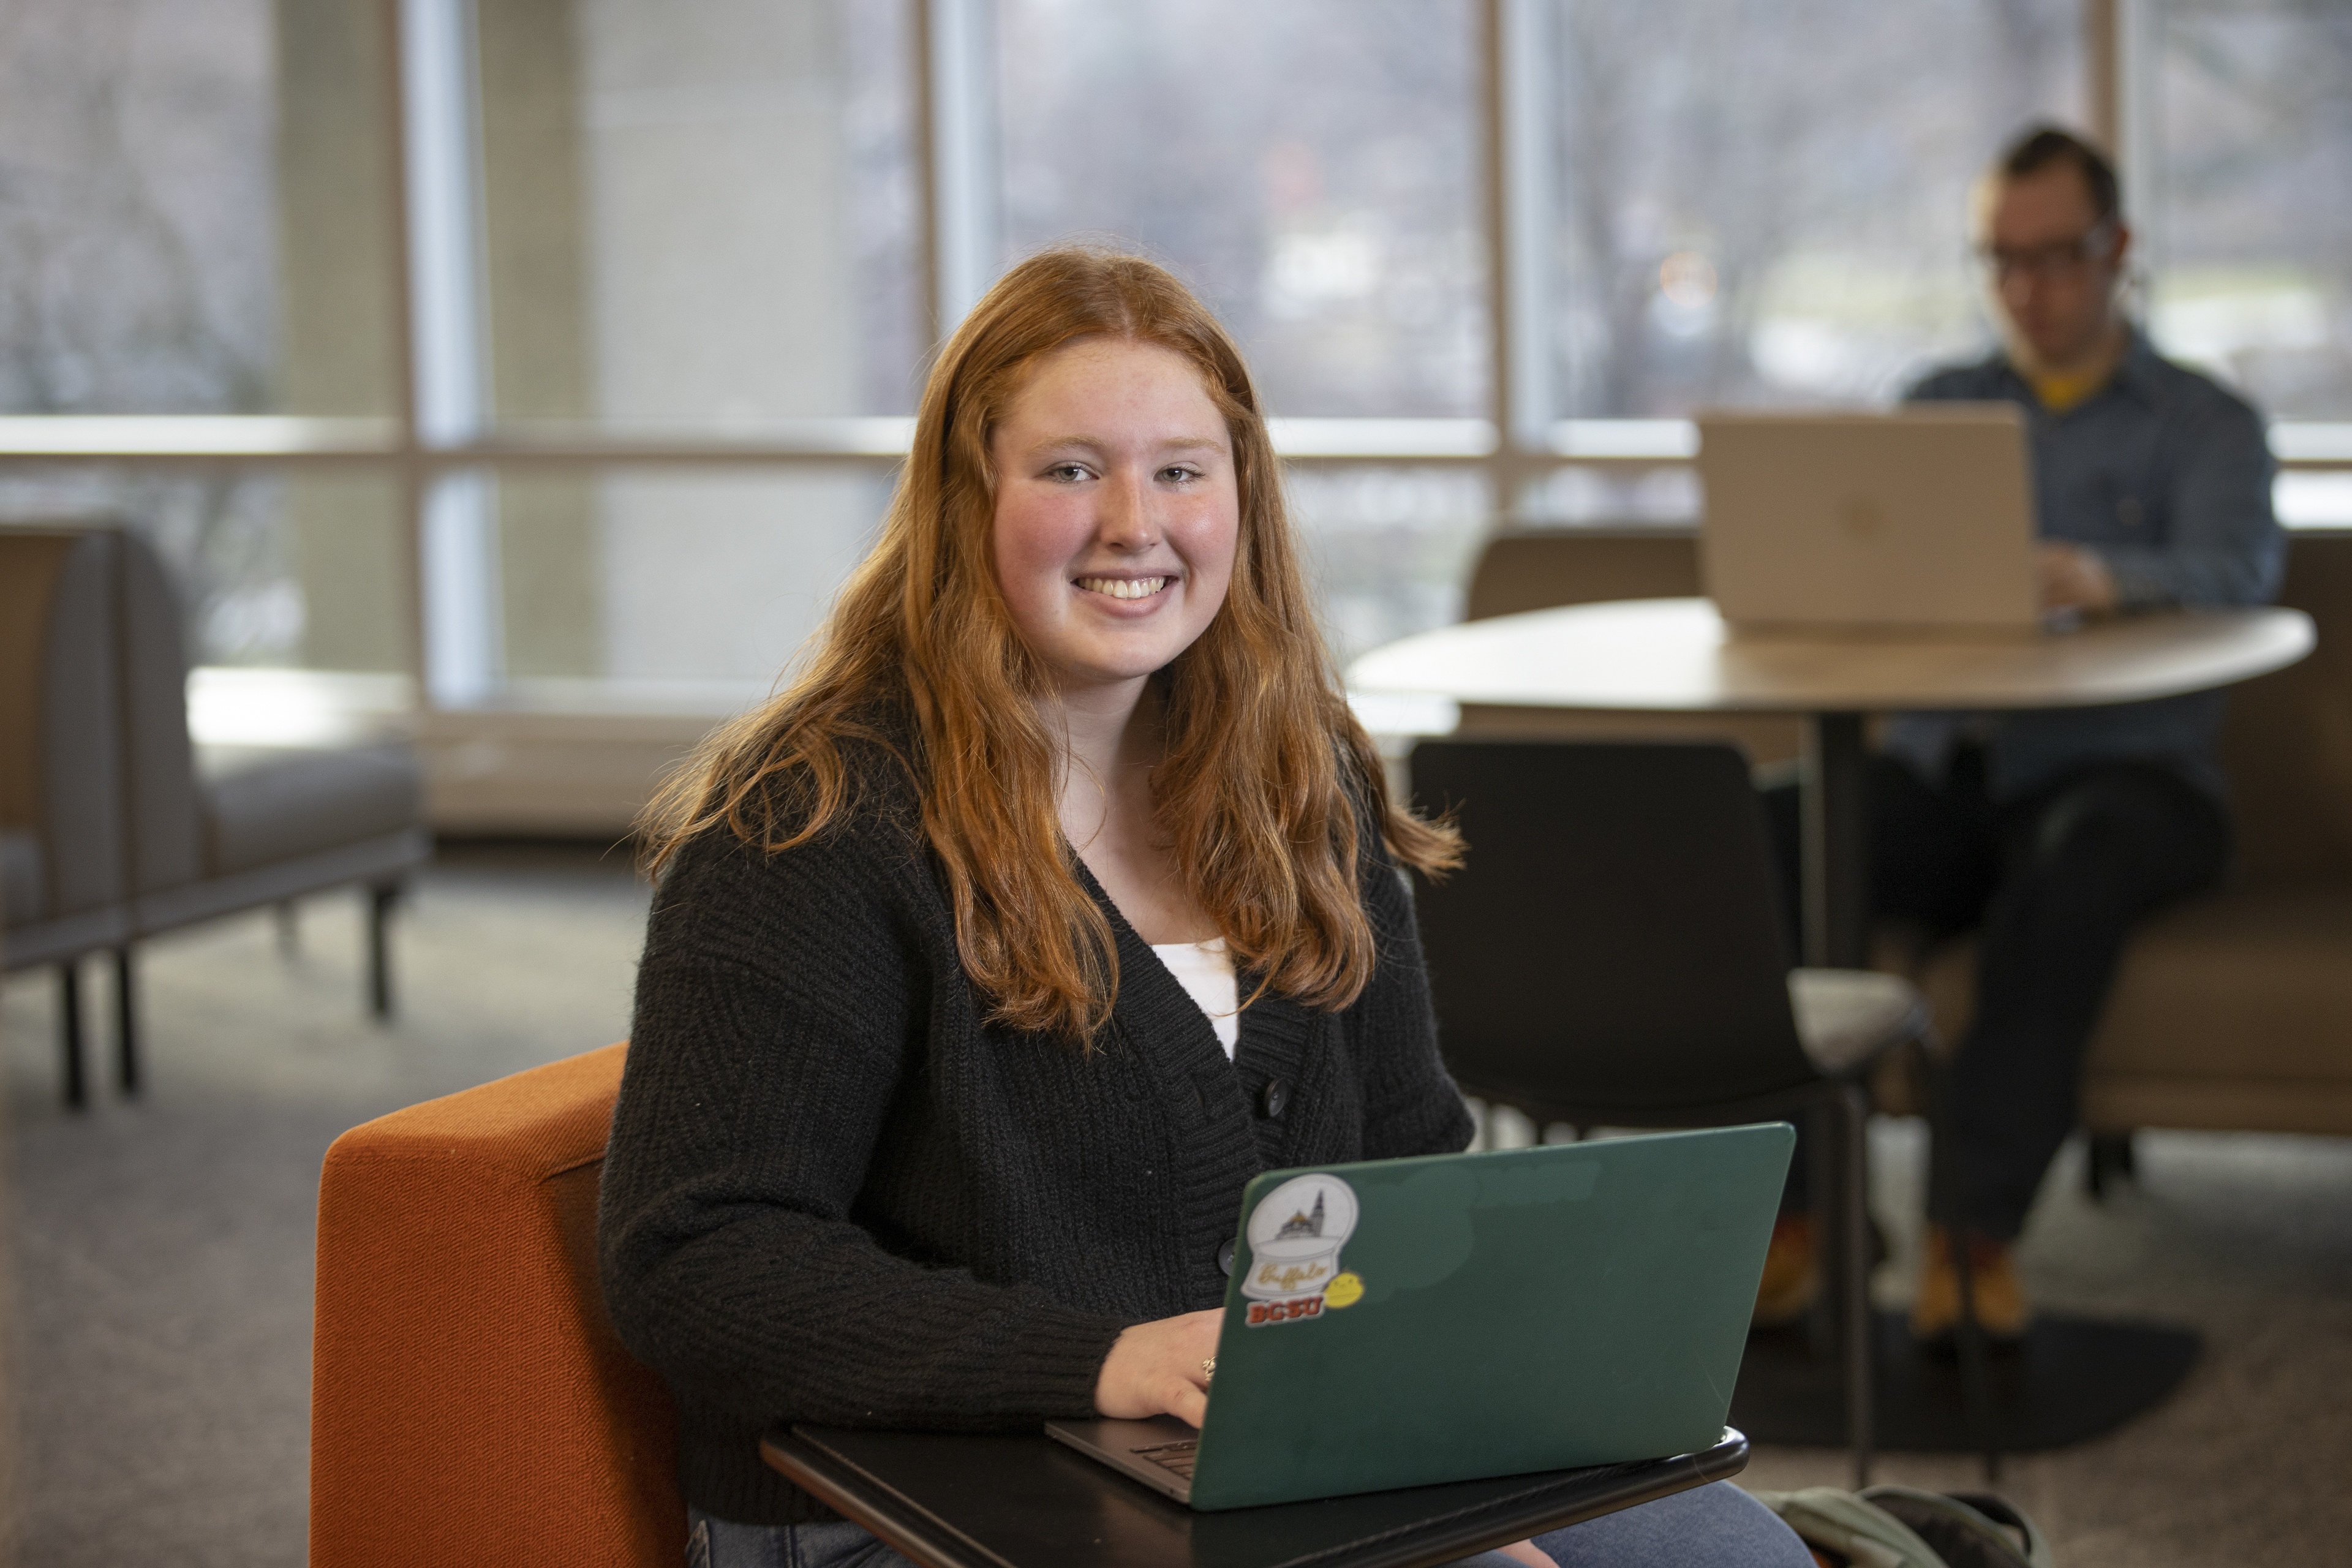 Life Design helped BGSU student Katie Hall reshape her educational journey and discover a new path forward. (Craig Bell/BGSU photo)